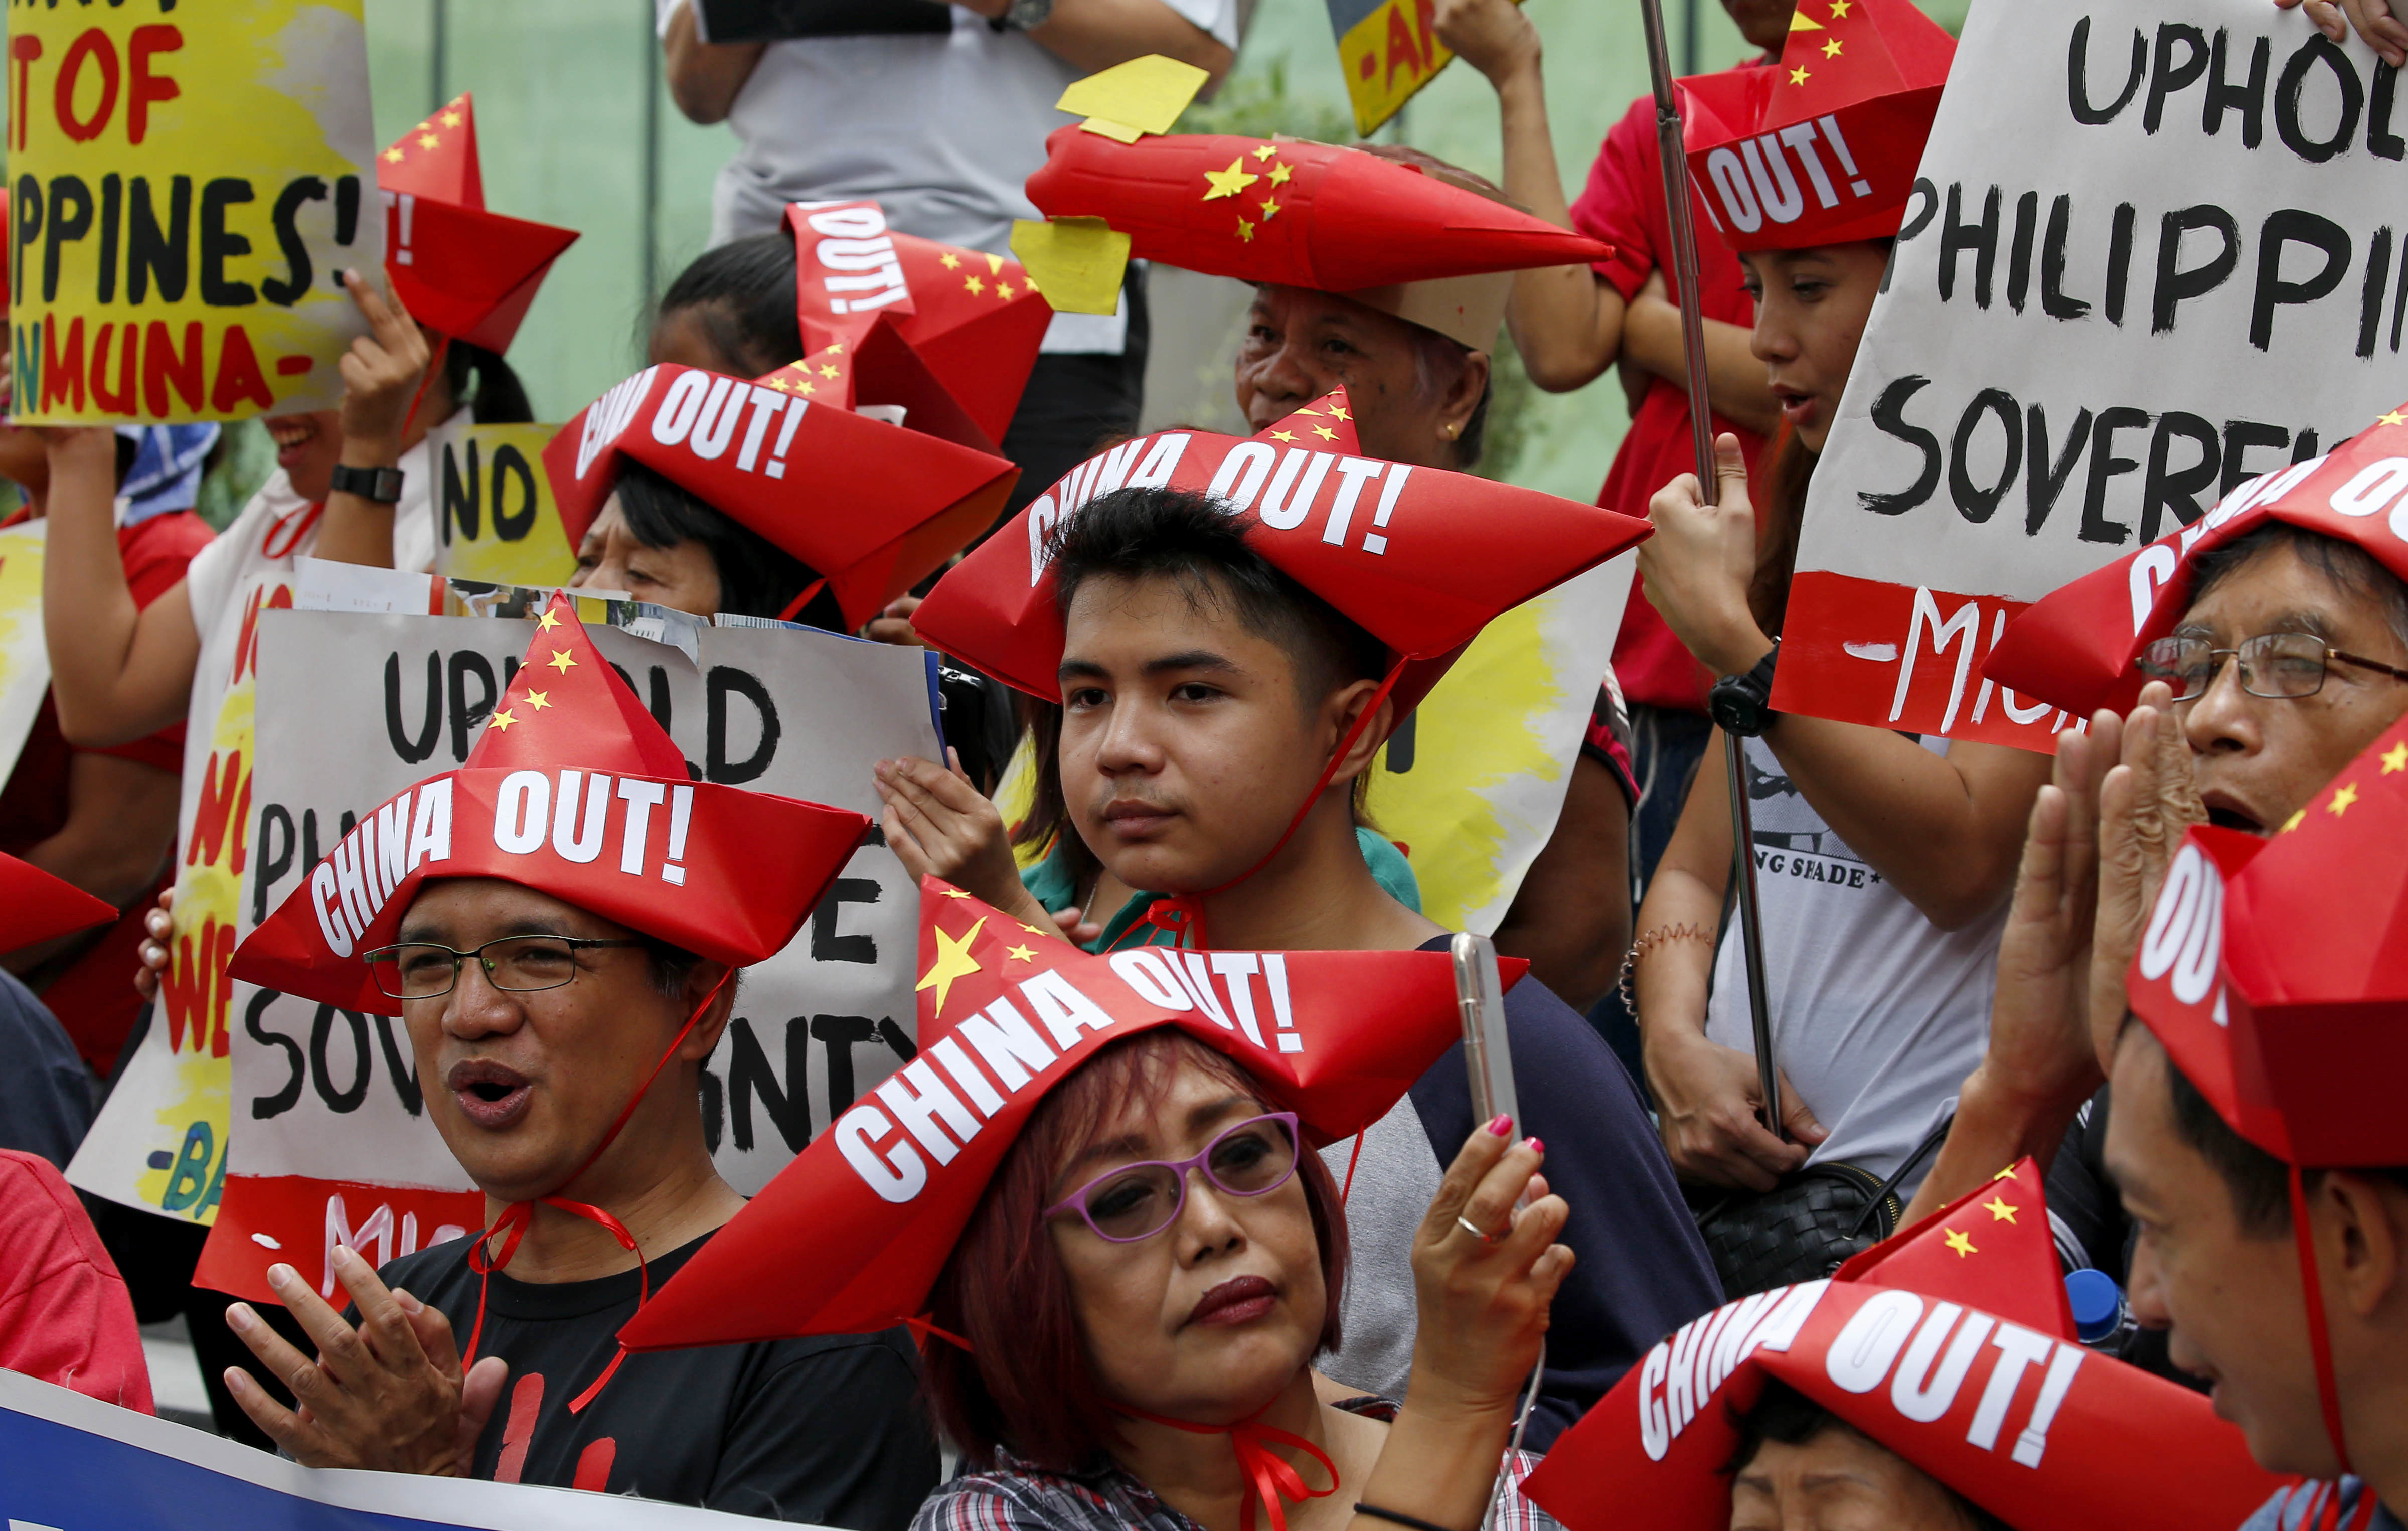 Protesters, wearing boat-shaped paper hats, shout slogans during a rally at the Chinese Consulate to protest China's alleged continued militarization of the disputed islands in the South China Sea known as Spratlys Saturday, Feb. 10, 2018 in the financial district of Makati city east of Manila, Philippines. The protesters also denounced President Rodrigo Duterte's inaction over China's continued build up of military facilities and structures at the disputed islands. (AP Photo/Bullit Marquez)